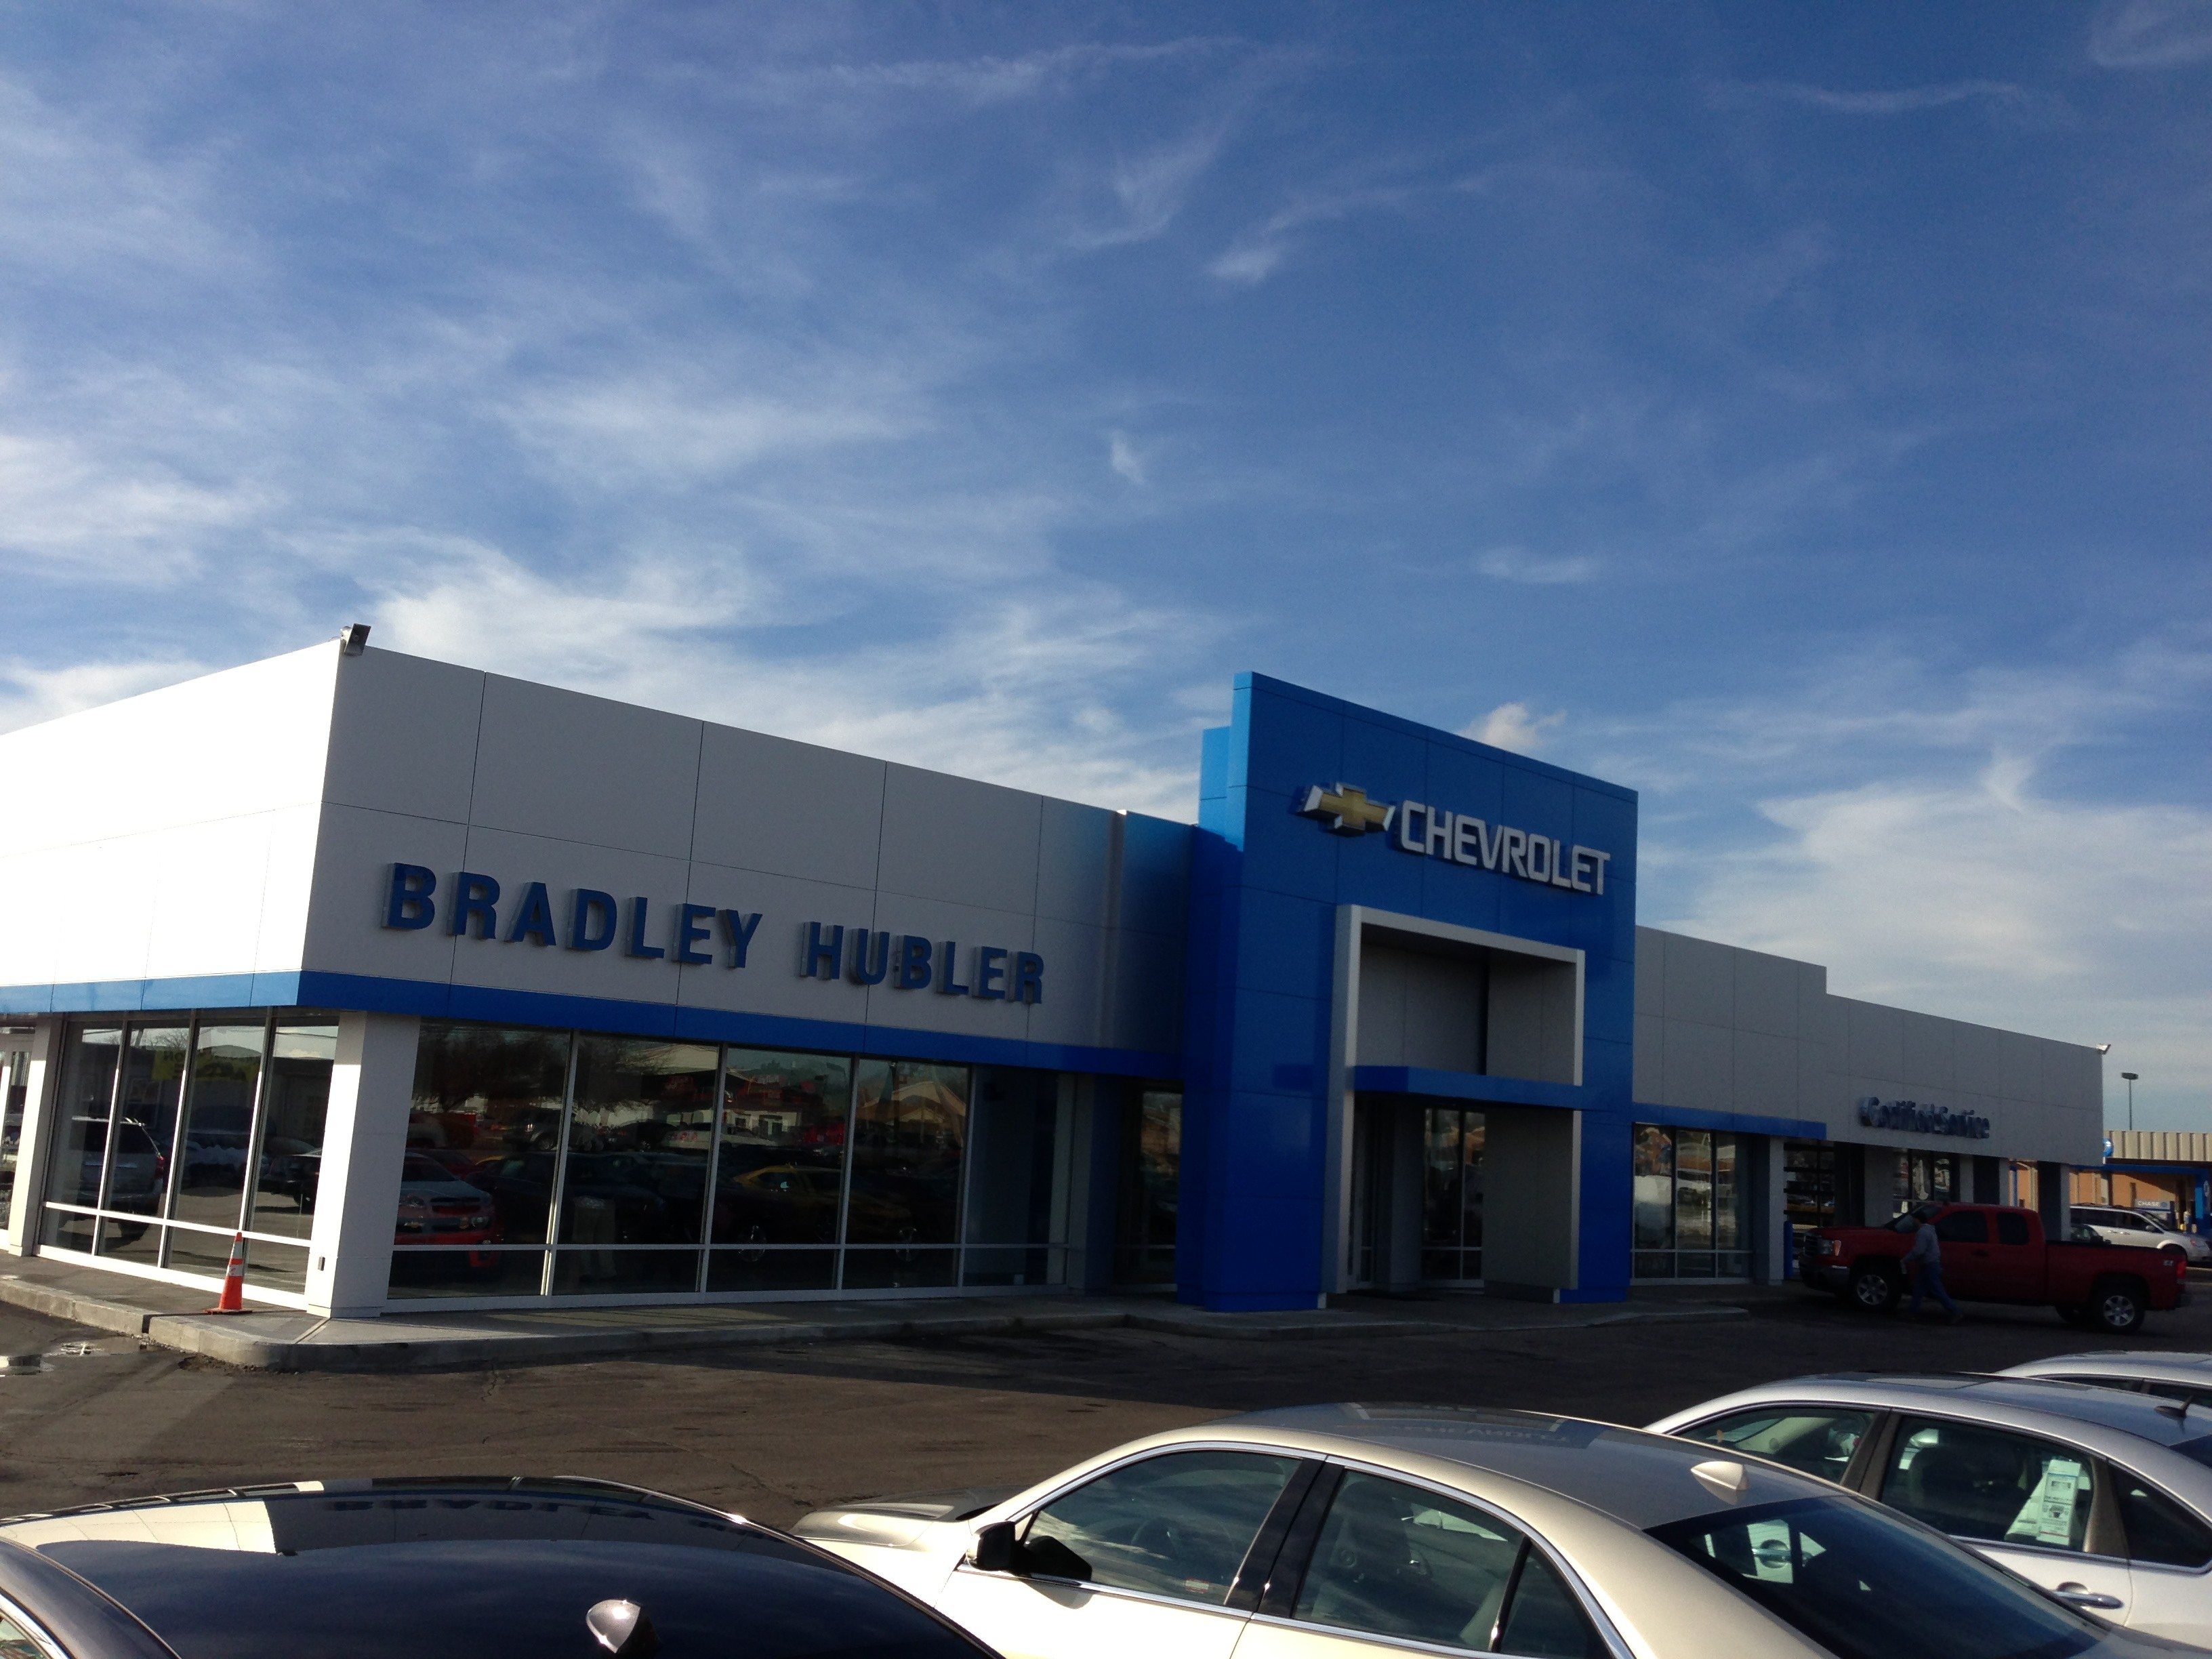 30 Years In Franklin For Bradley Hubler Chevrolet Indy Auto Blog